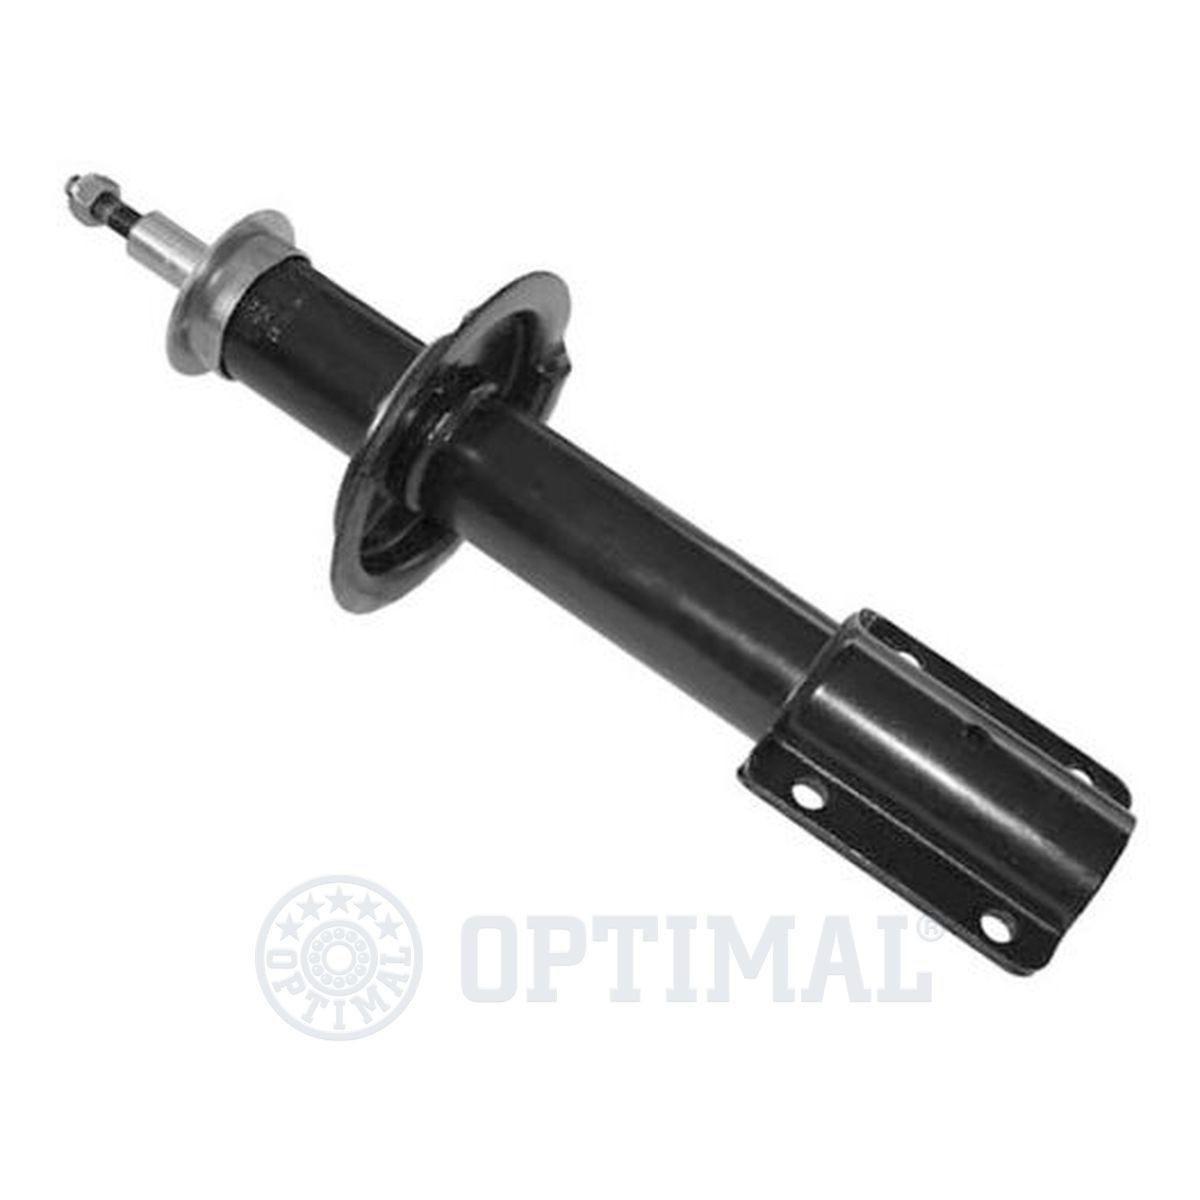 OPTIMAL Shock absorbers rear and front Peugeot J5 Van new A-3851H